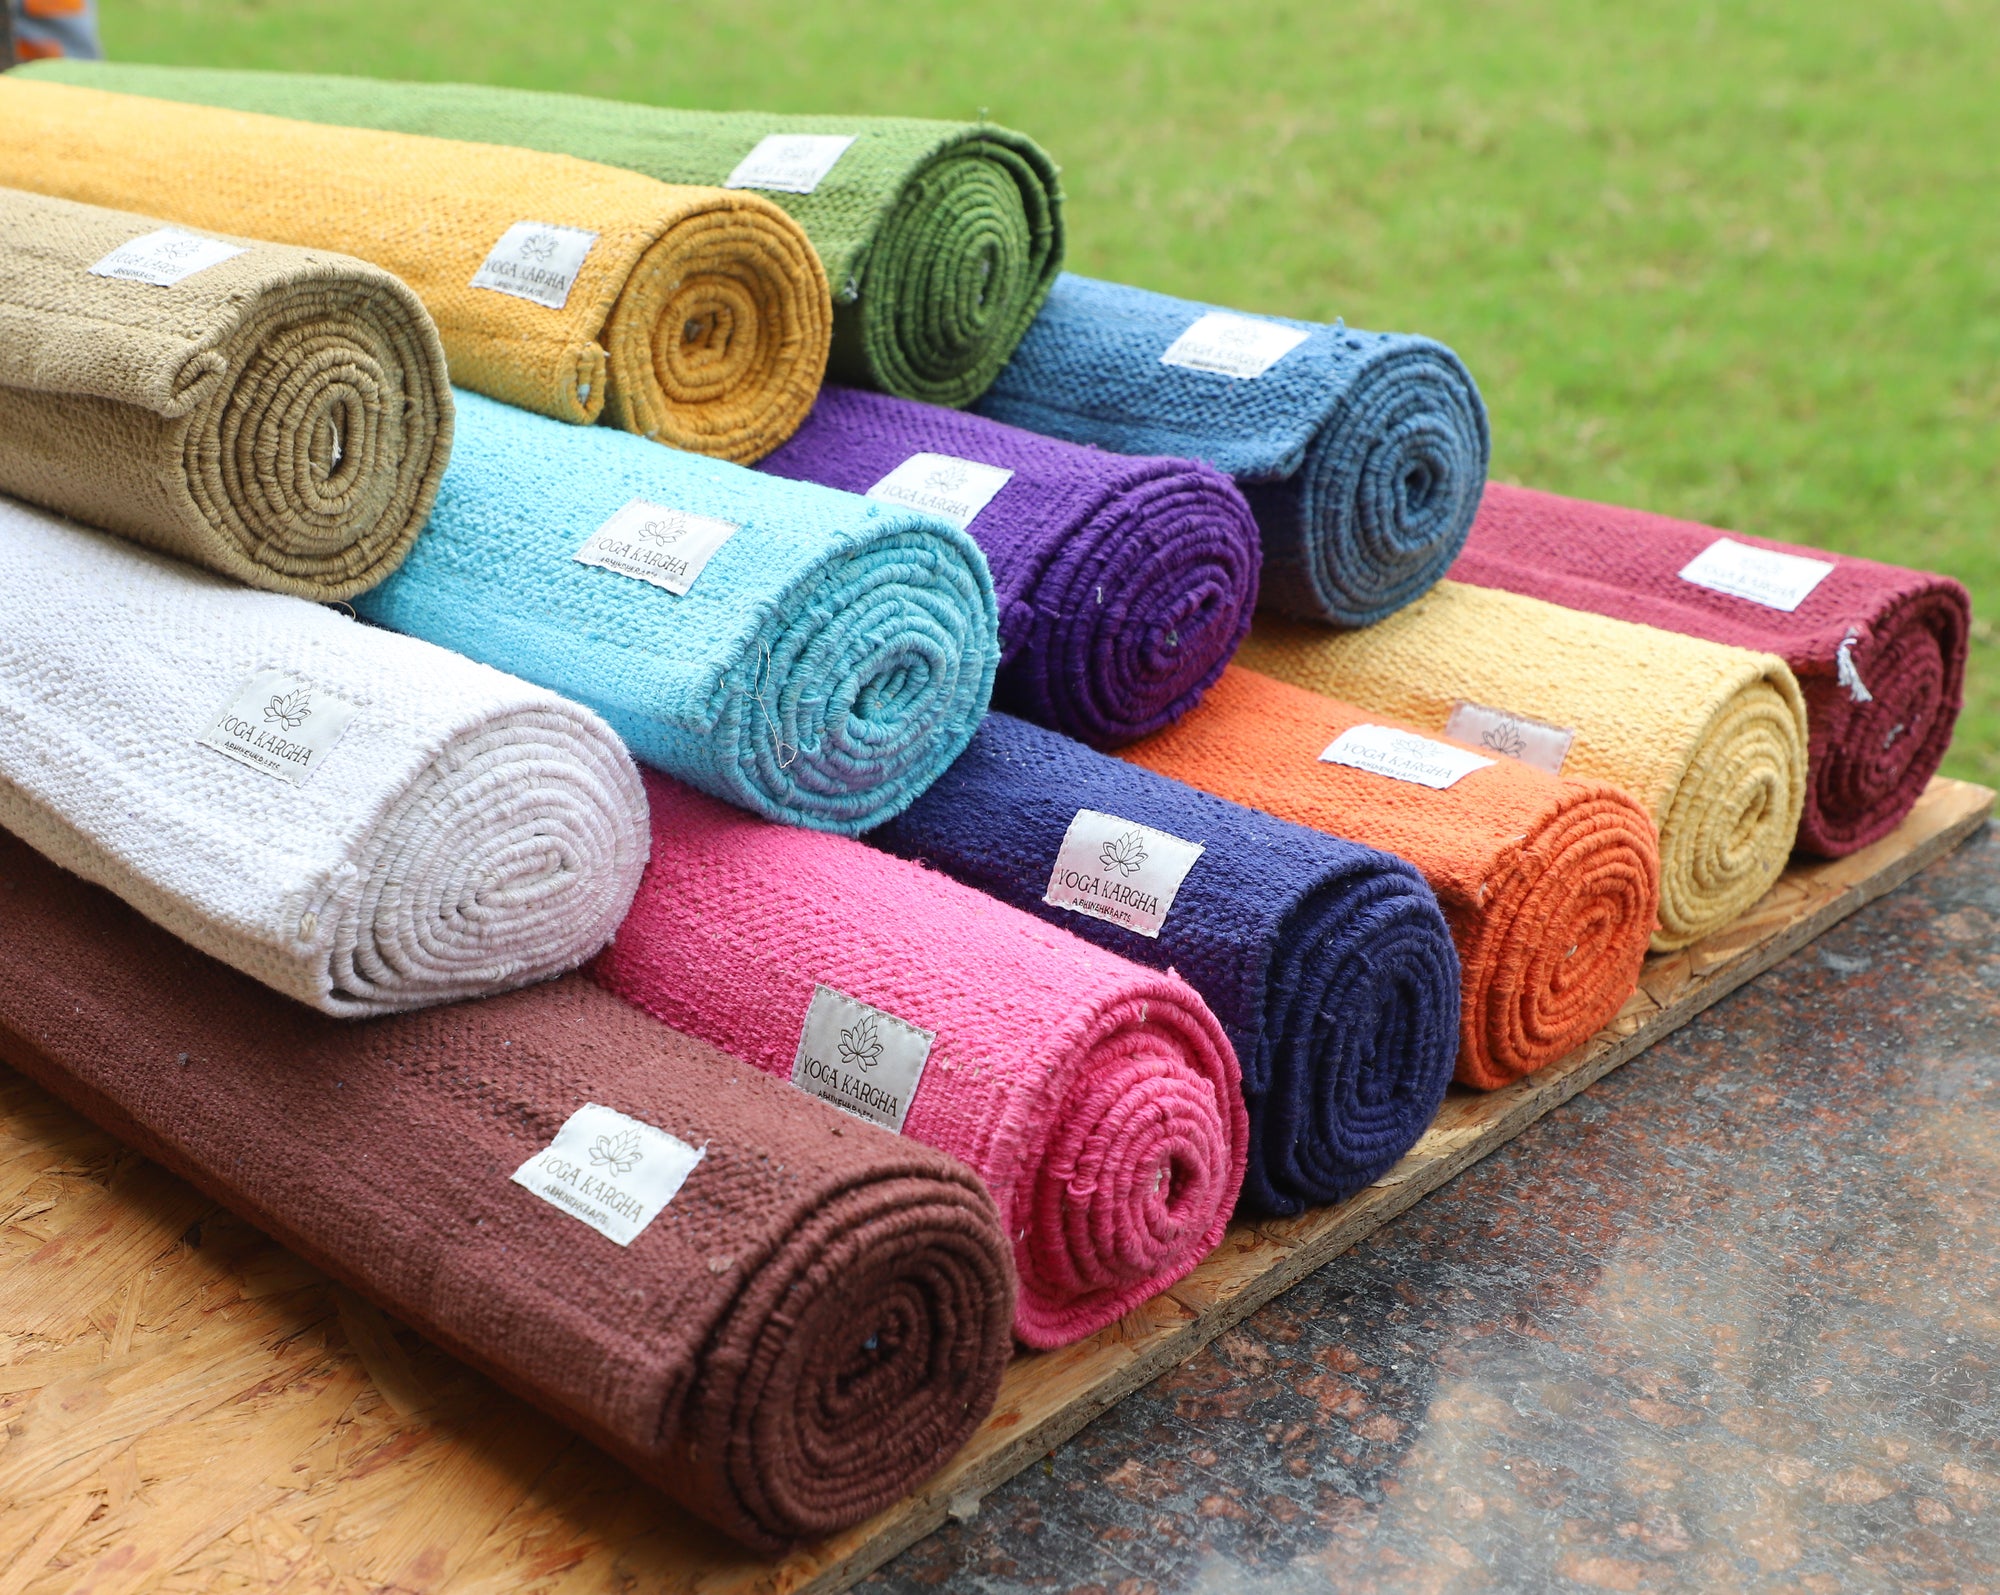 Super Thick Cotton Handwoven Anti Skid Mat for Hot Yoga and